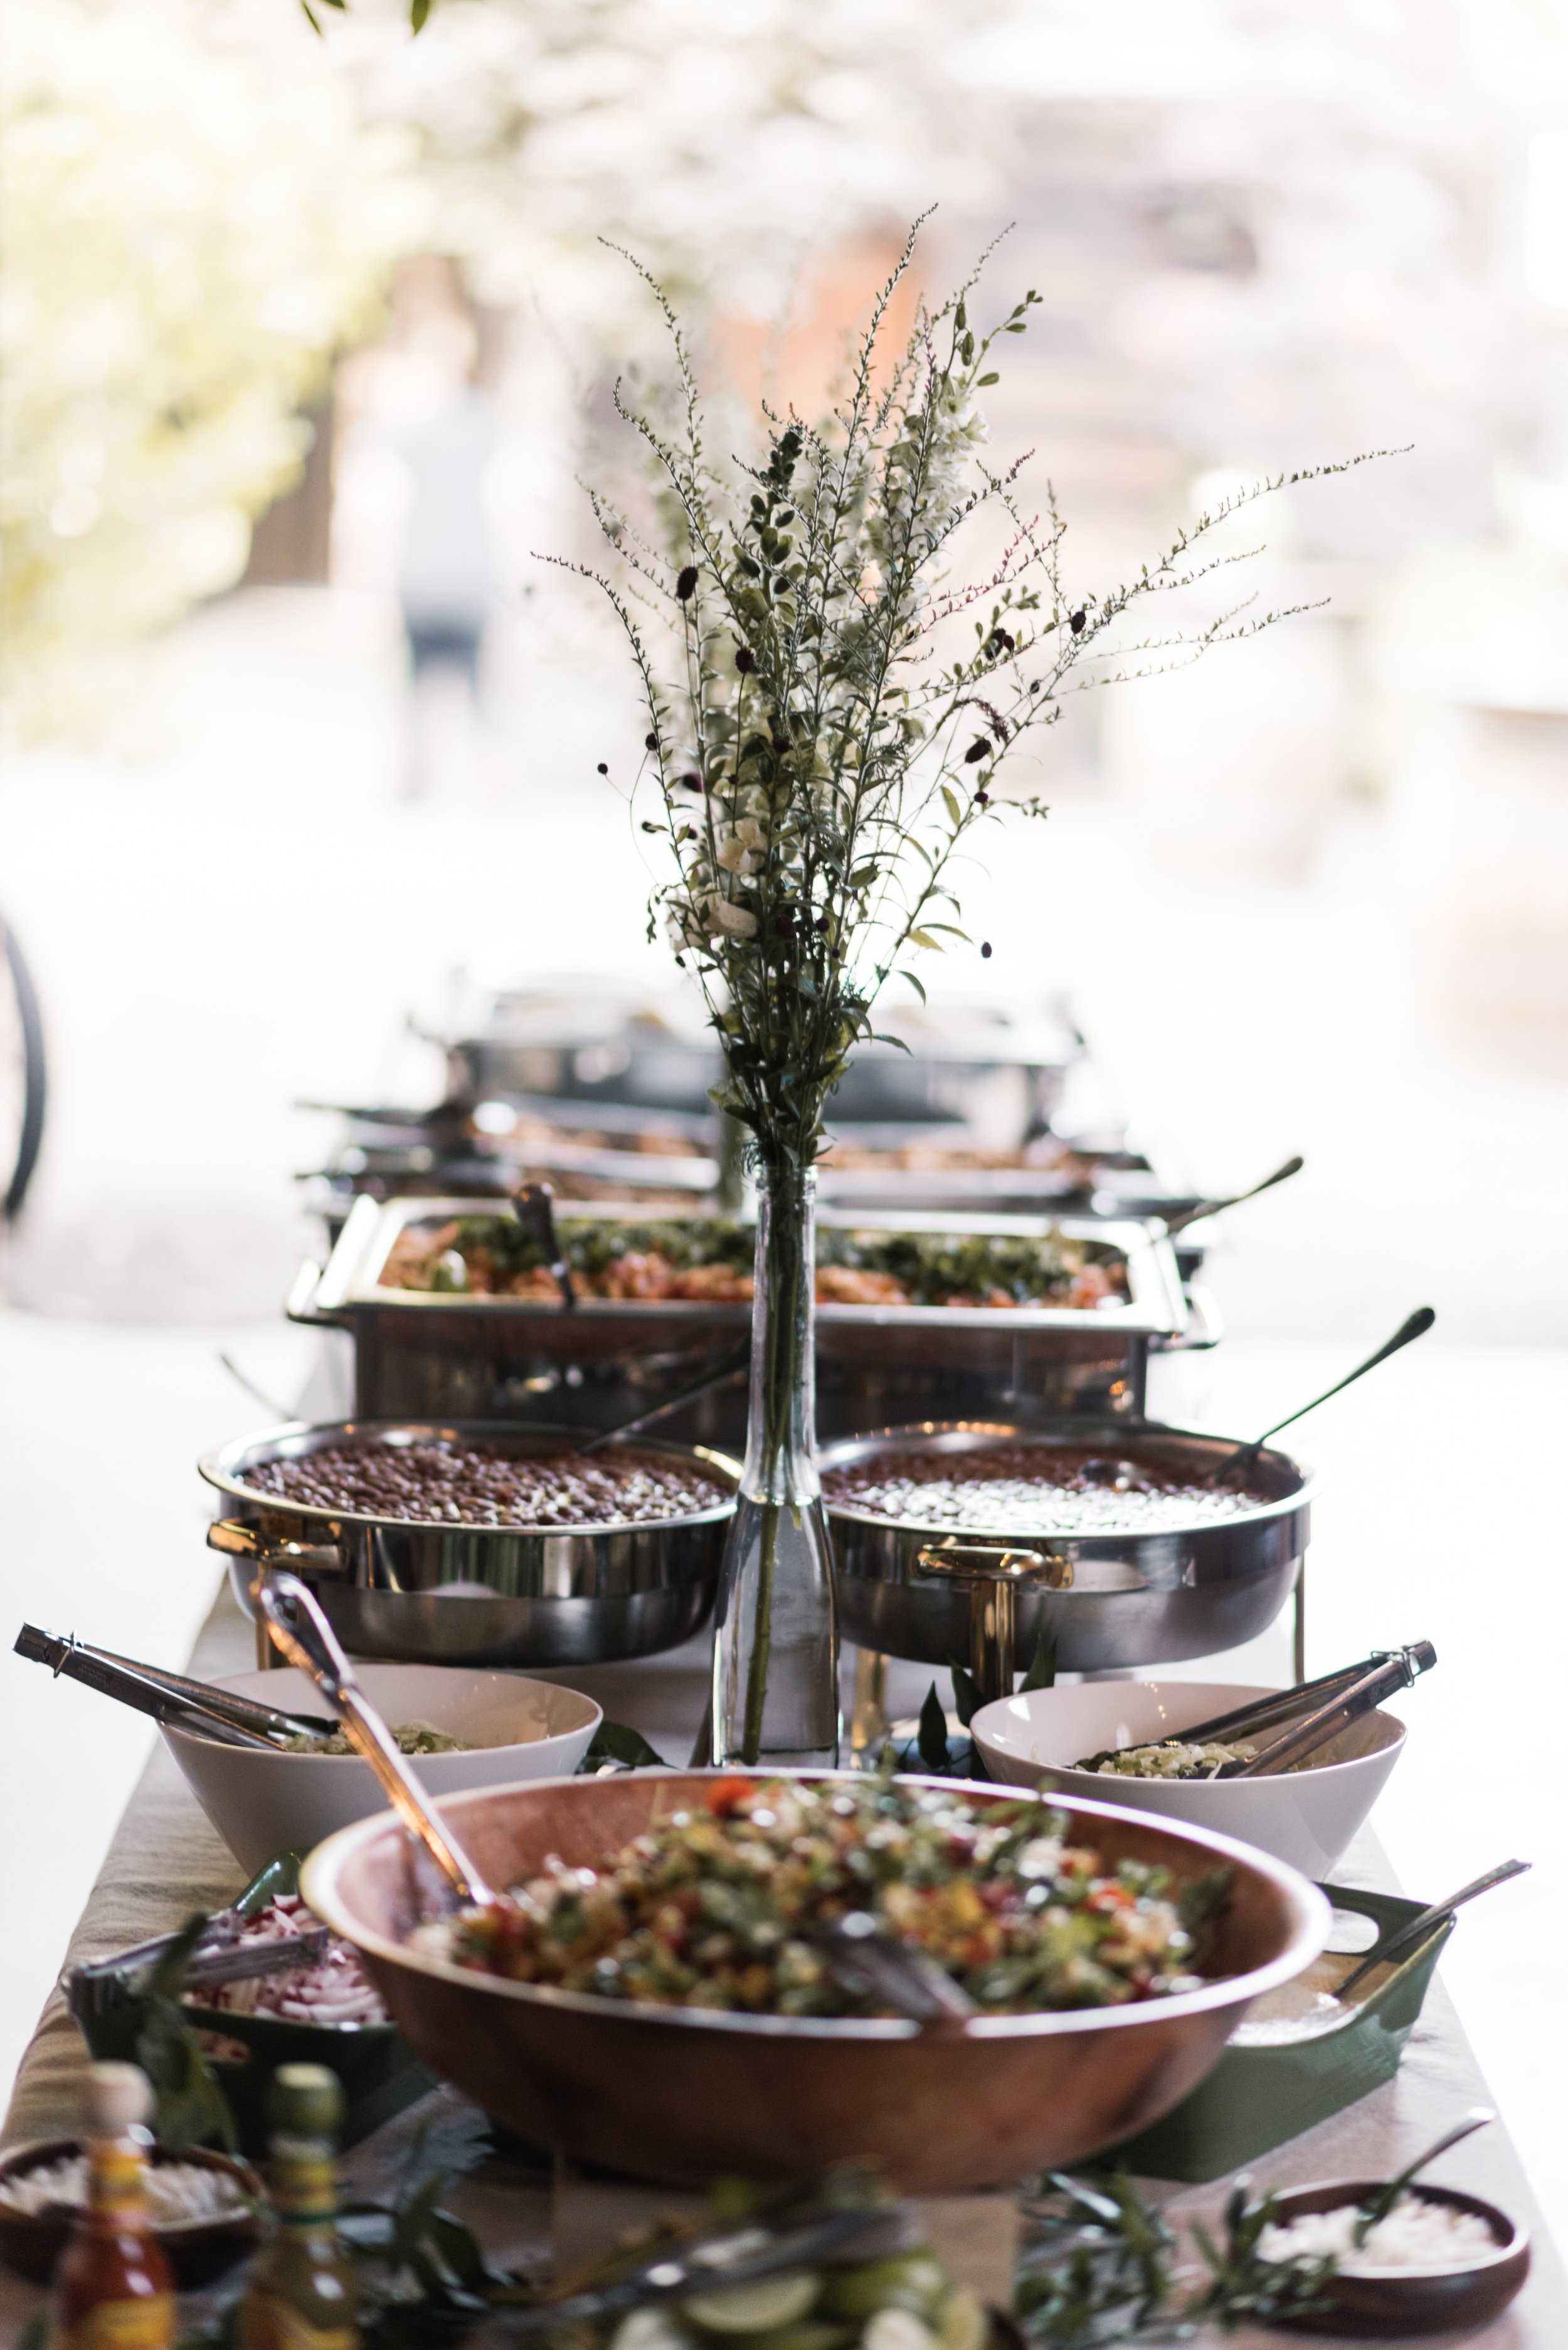  Caterer: @Freasecatering 